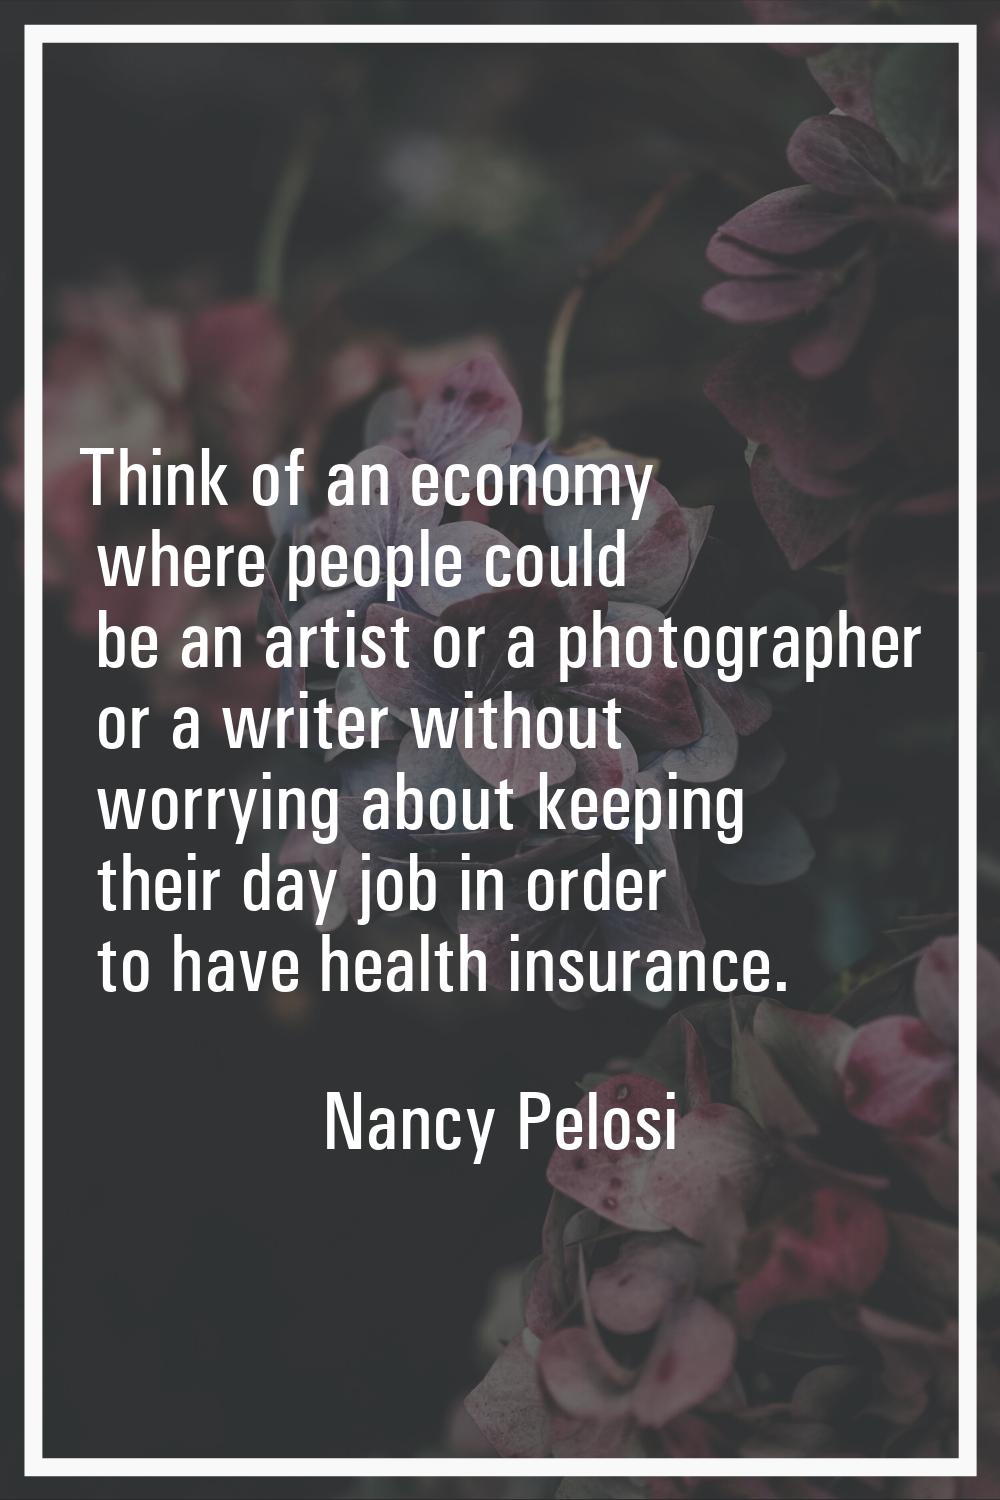 Think of an economy where people could be an artist or a photographer or a writer without worrying 